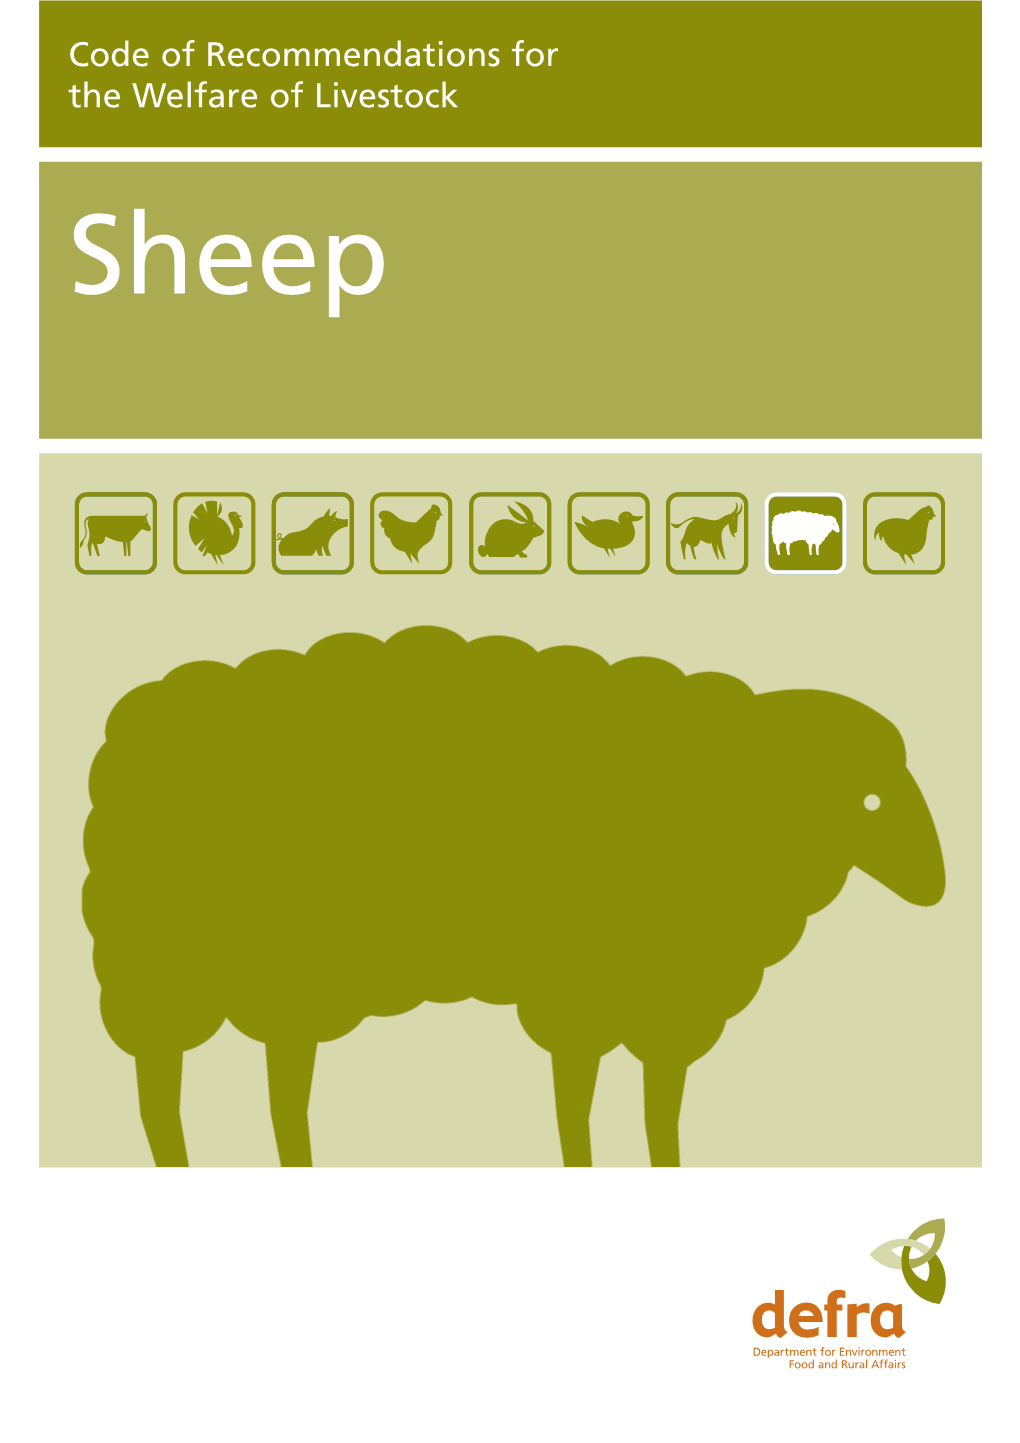 Code of Recommendations for the Welfare of Livestock Sheep Sheep CORP AW 28/10/04 07:49 Page 3